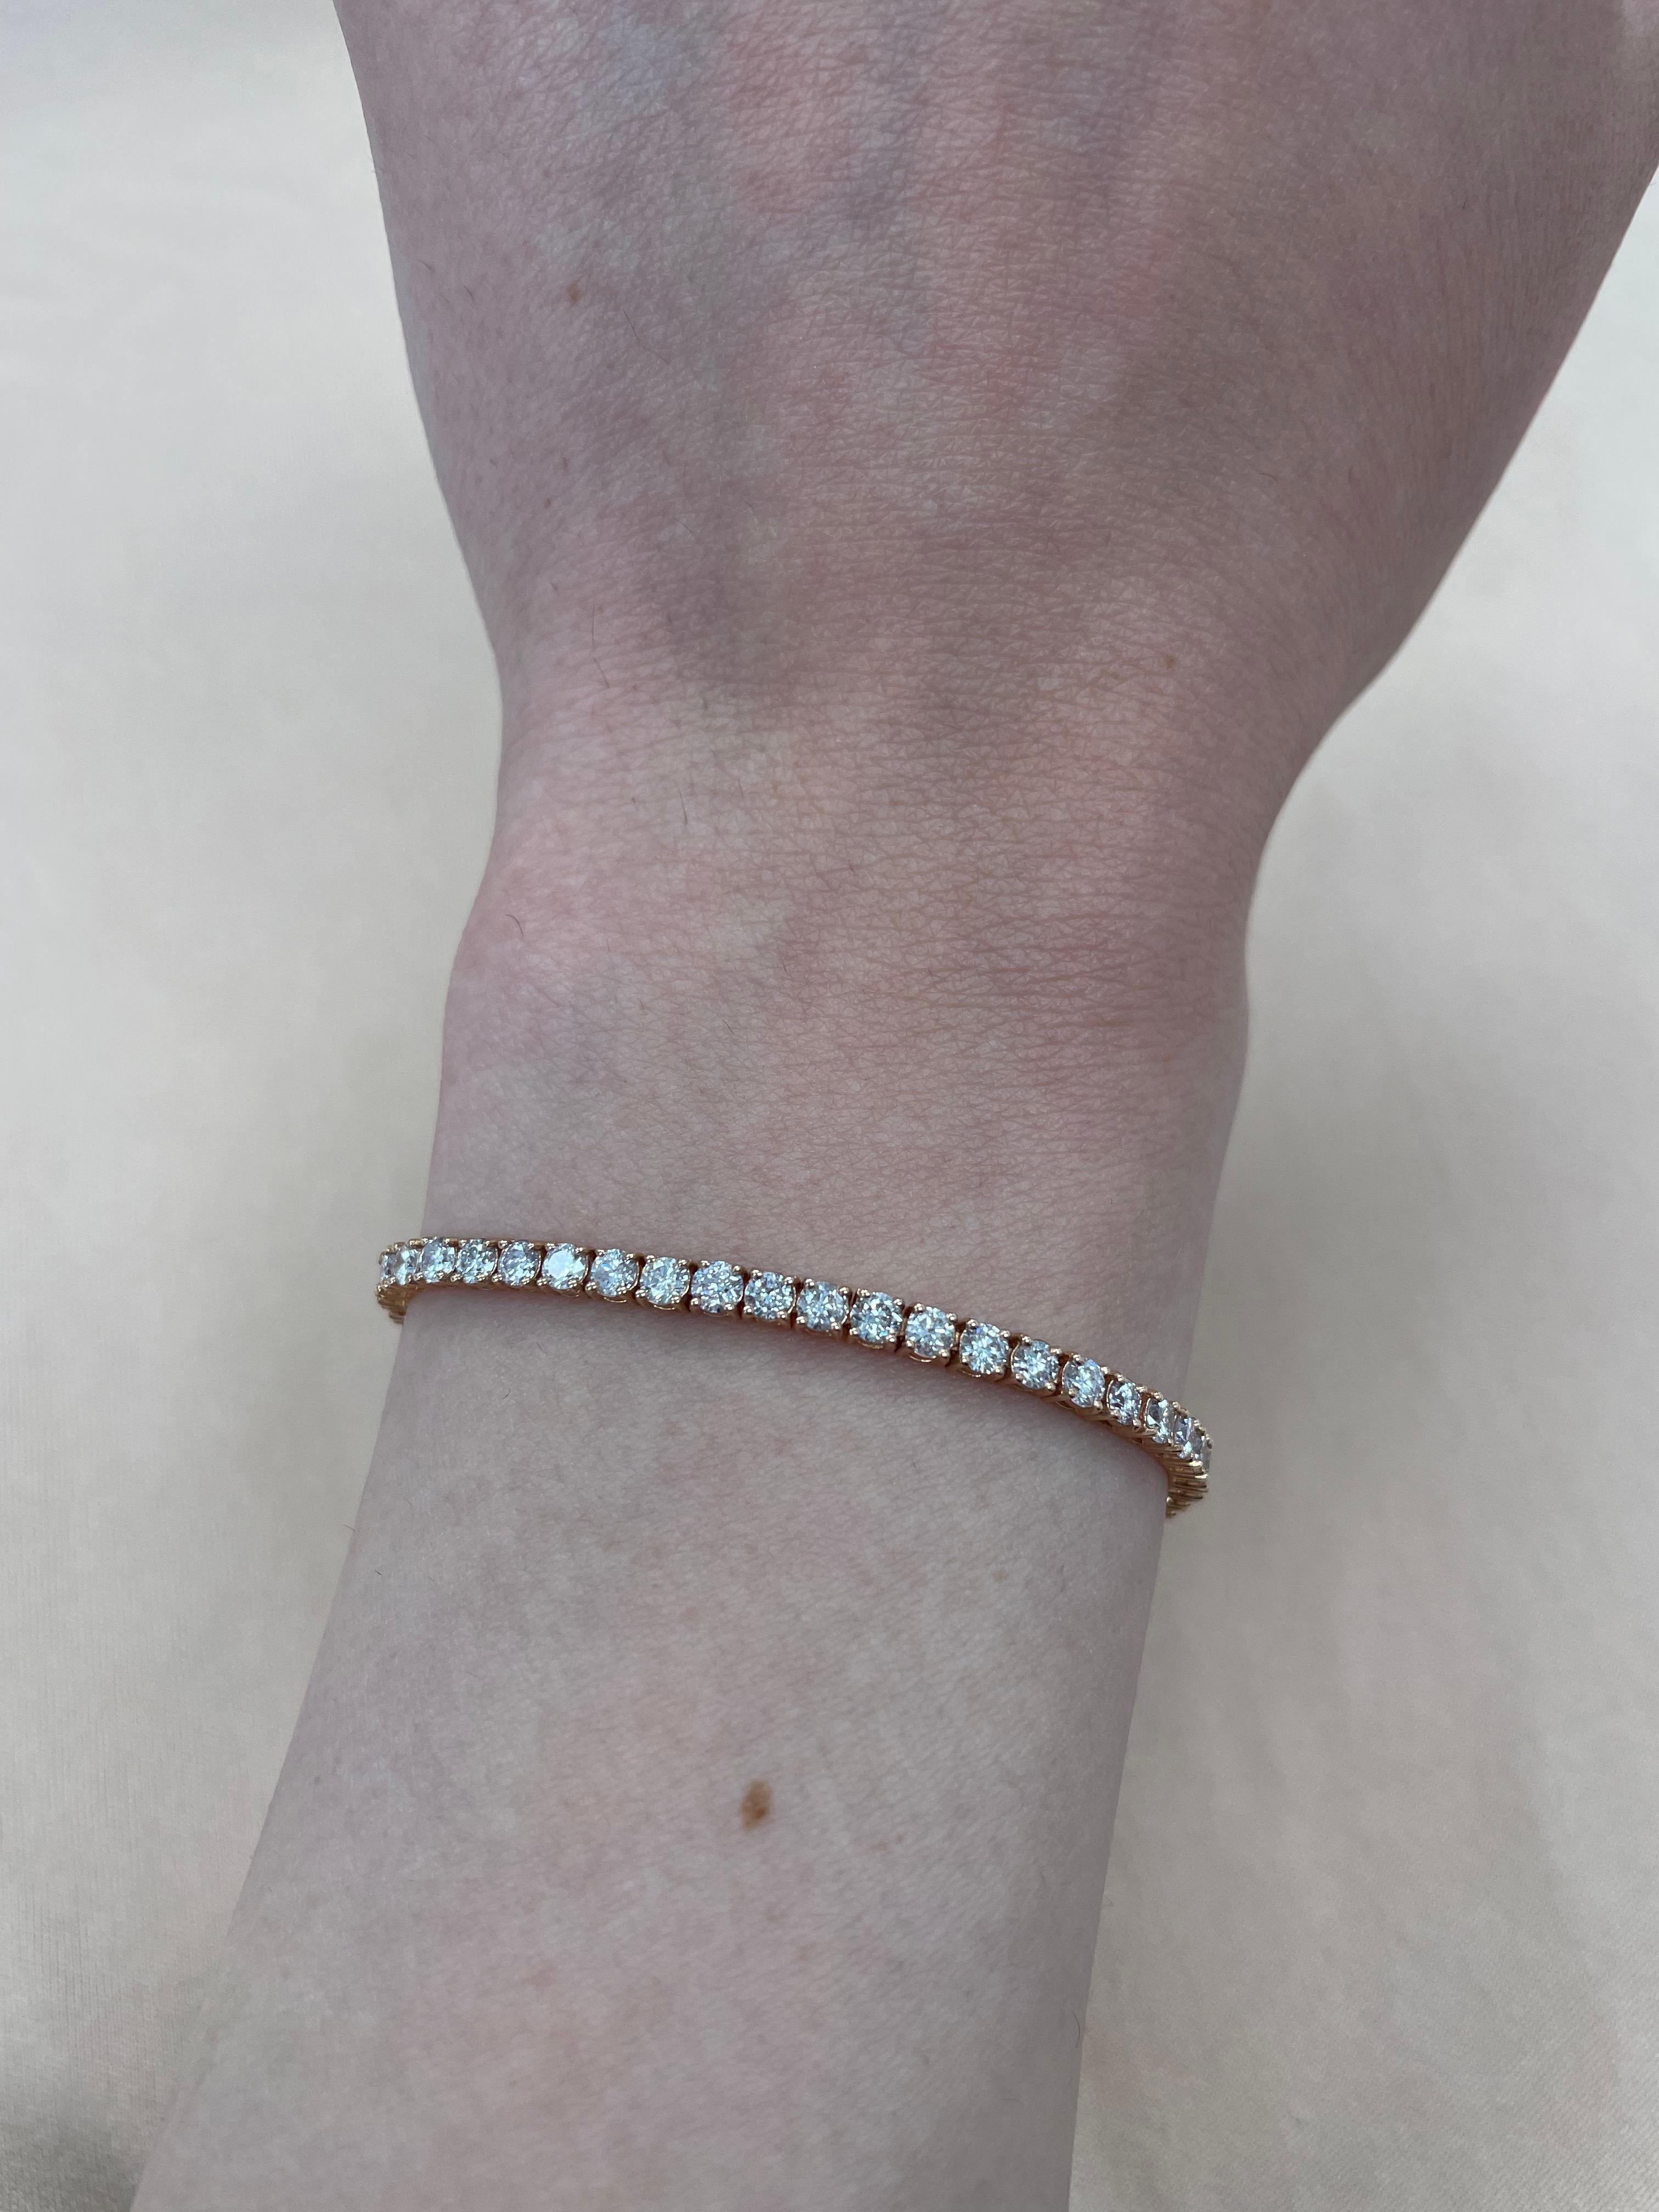 Exquisite and timeless diamonds tennis bracelet, by Alexander Beverly Hills.
62 round brilliant diamonds, 4.30 carats total. Approximately Very Light Pink color (looks like regular white diamonds in mounting) and SI clarity. Four prong set in 14k